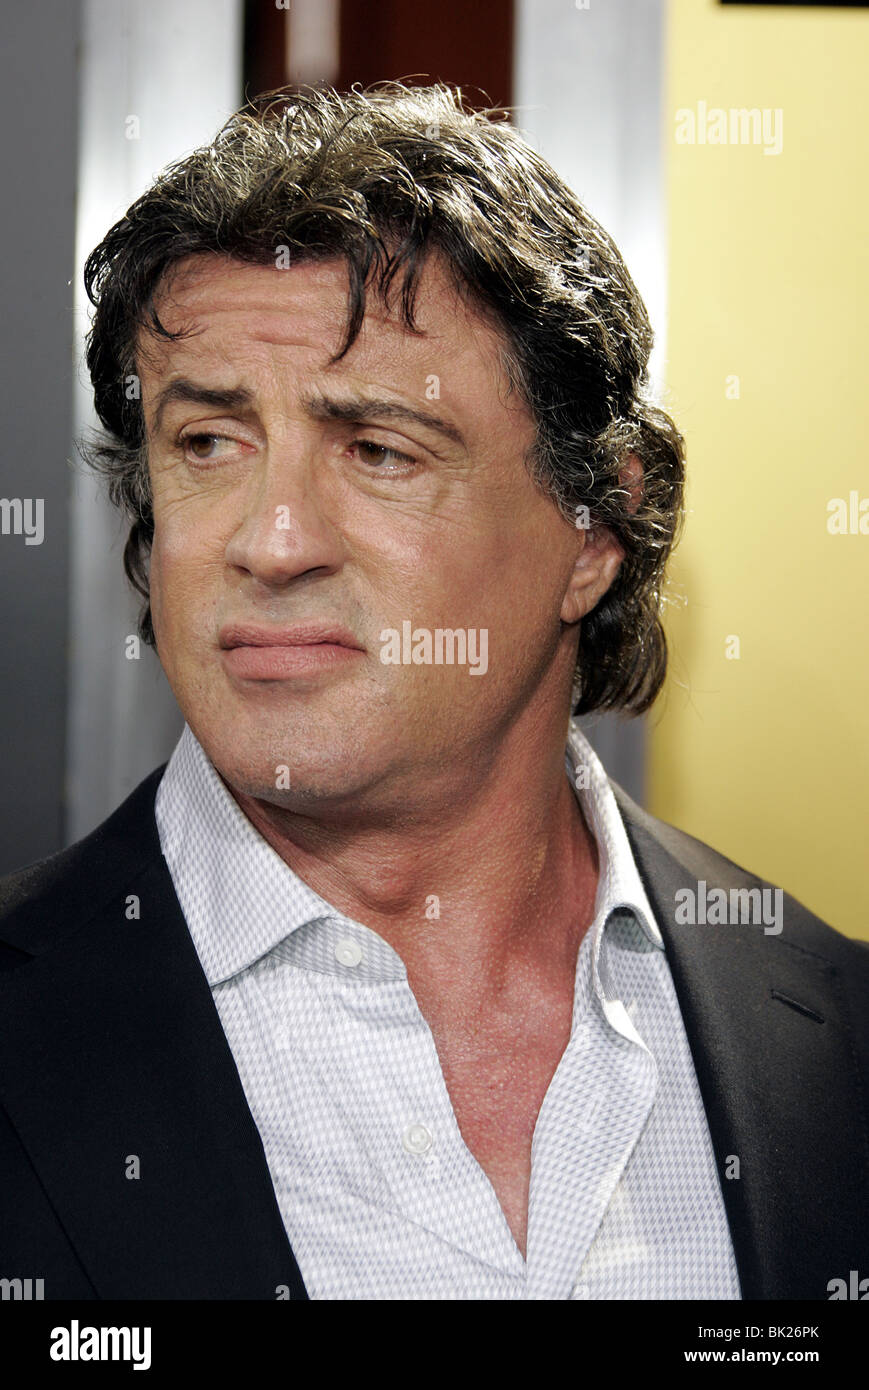 SYLVESTER STALLONE ROCKY BALBOA WORLD PREMIERE GRAUMAN'S CHINESE THEATRE HOLLYWOOD USA 13 December 2006 Stock Photo